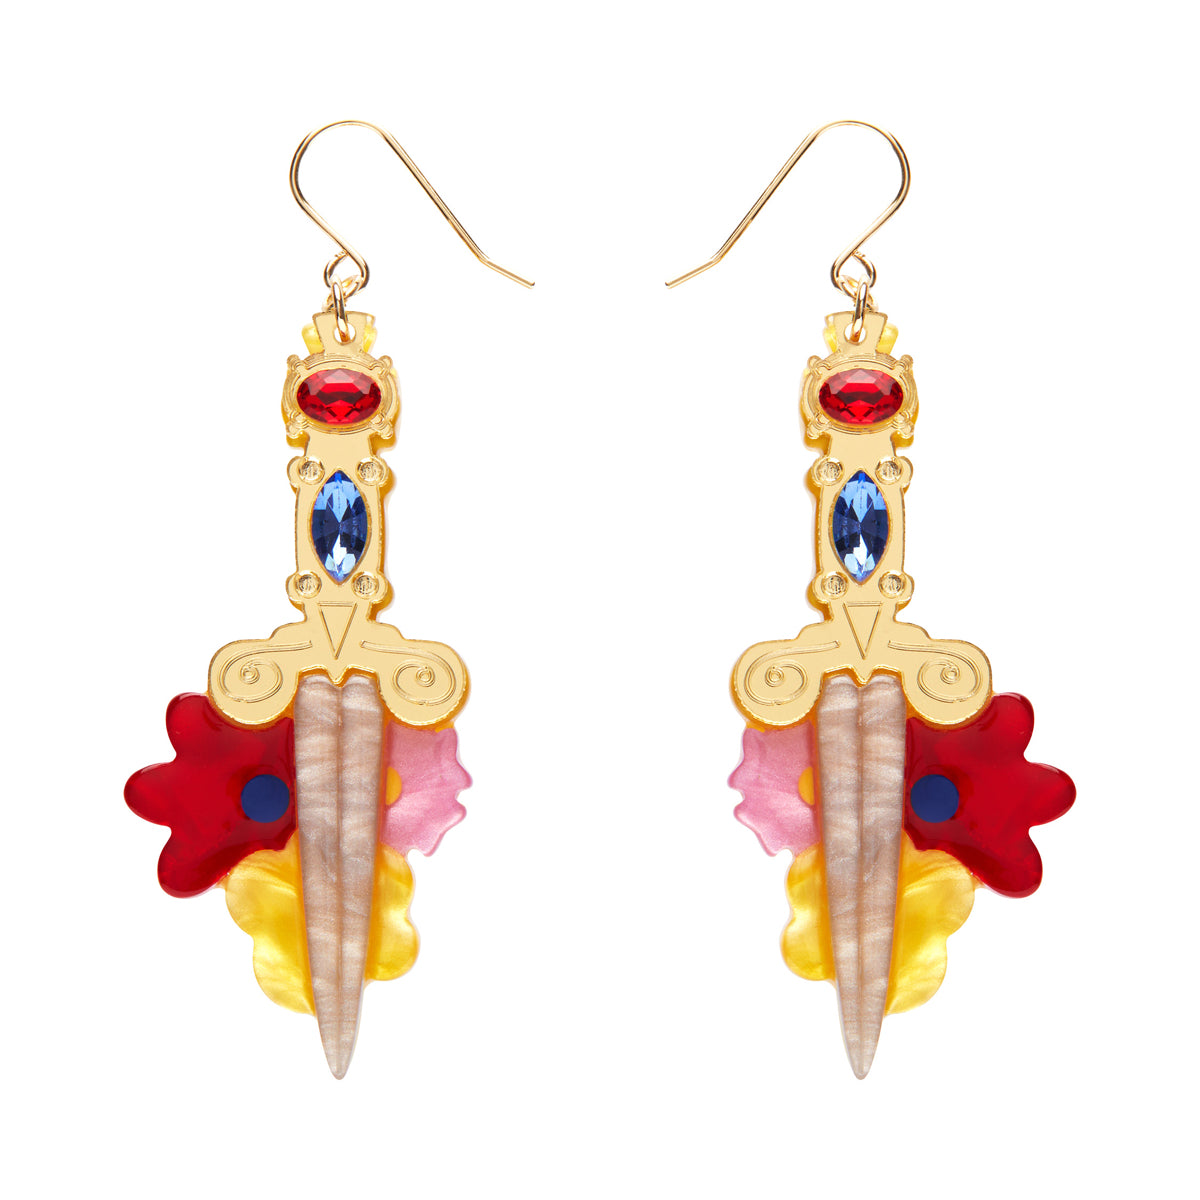 pair Erstwilder's Spellbound collection "Double-Edged Delight" mirror gold handled dagger layered resin dangle earrings with inset Czech glass crystals